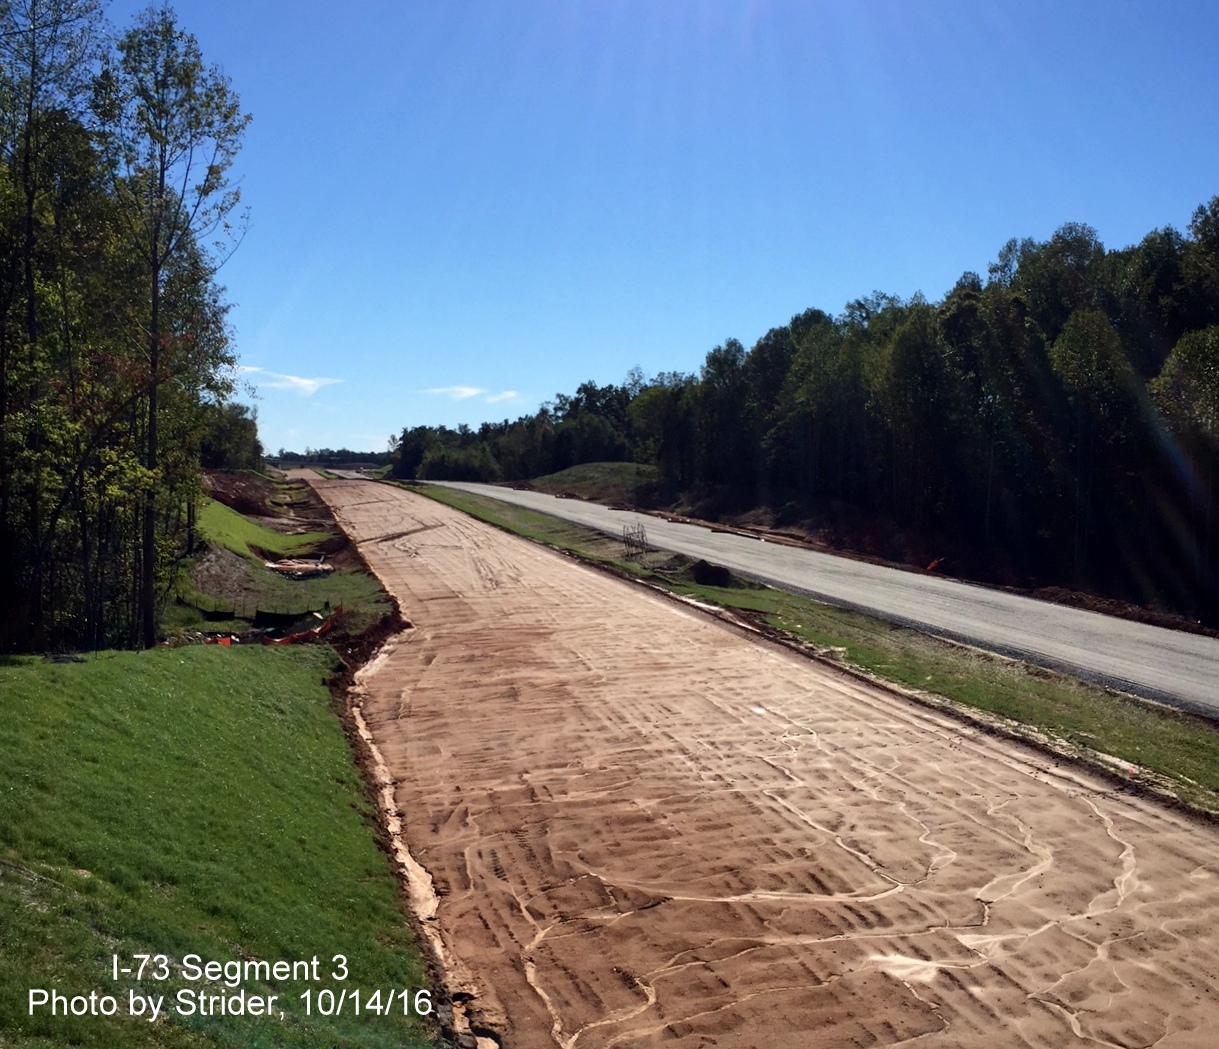 Image looking south from Deboe Road showing construction progress on future I-73 highway, from Strider